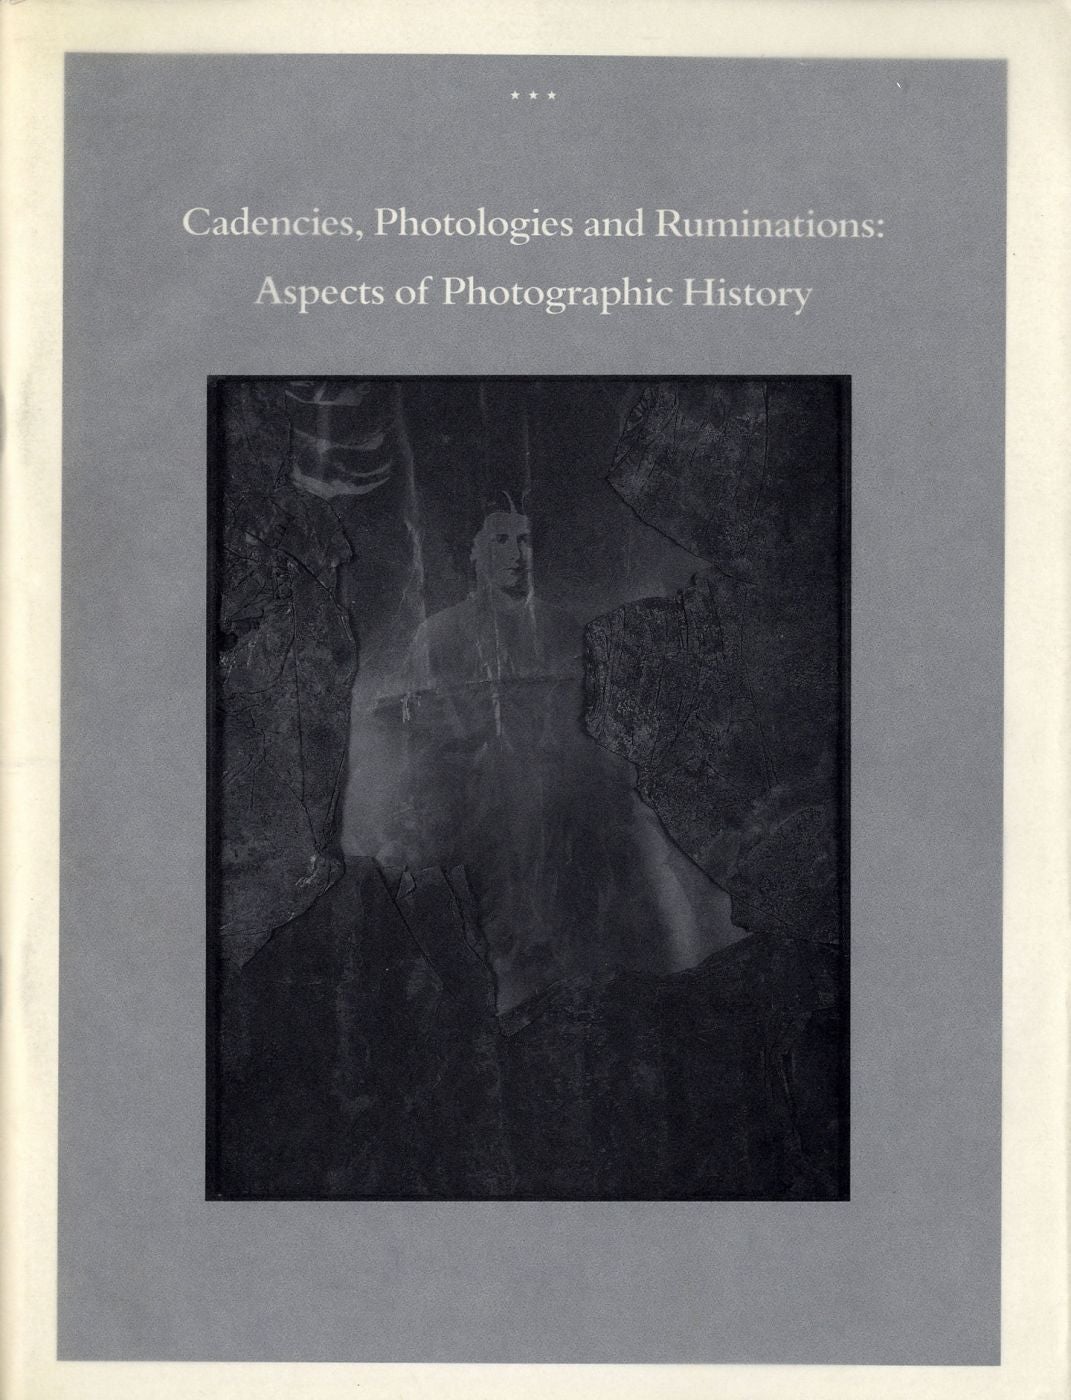 Cadencies, Photologies and Ruminations: Aspects of Photographic History (San Francisco Camerawork Quarterly Volume 16. No. 2 & 3)